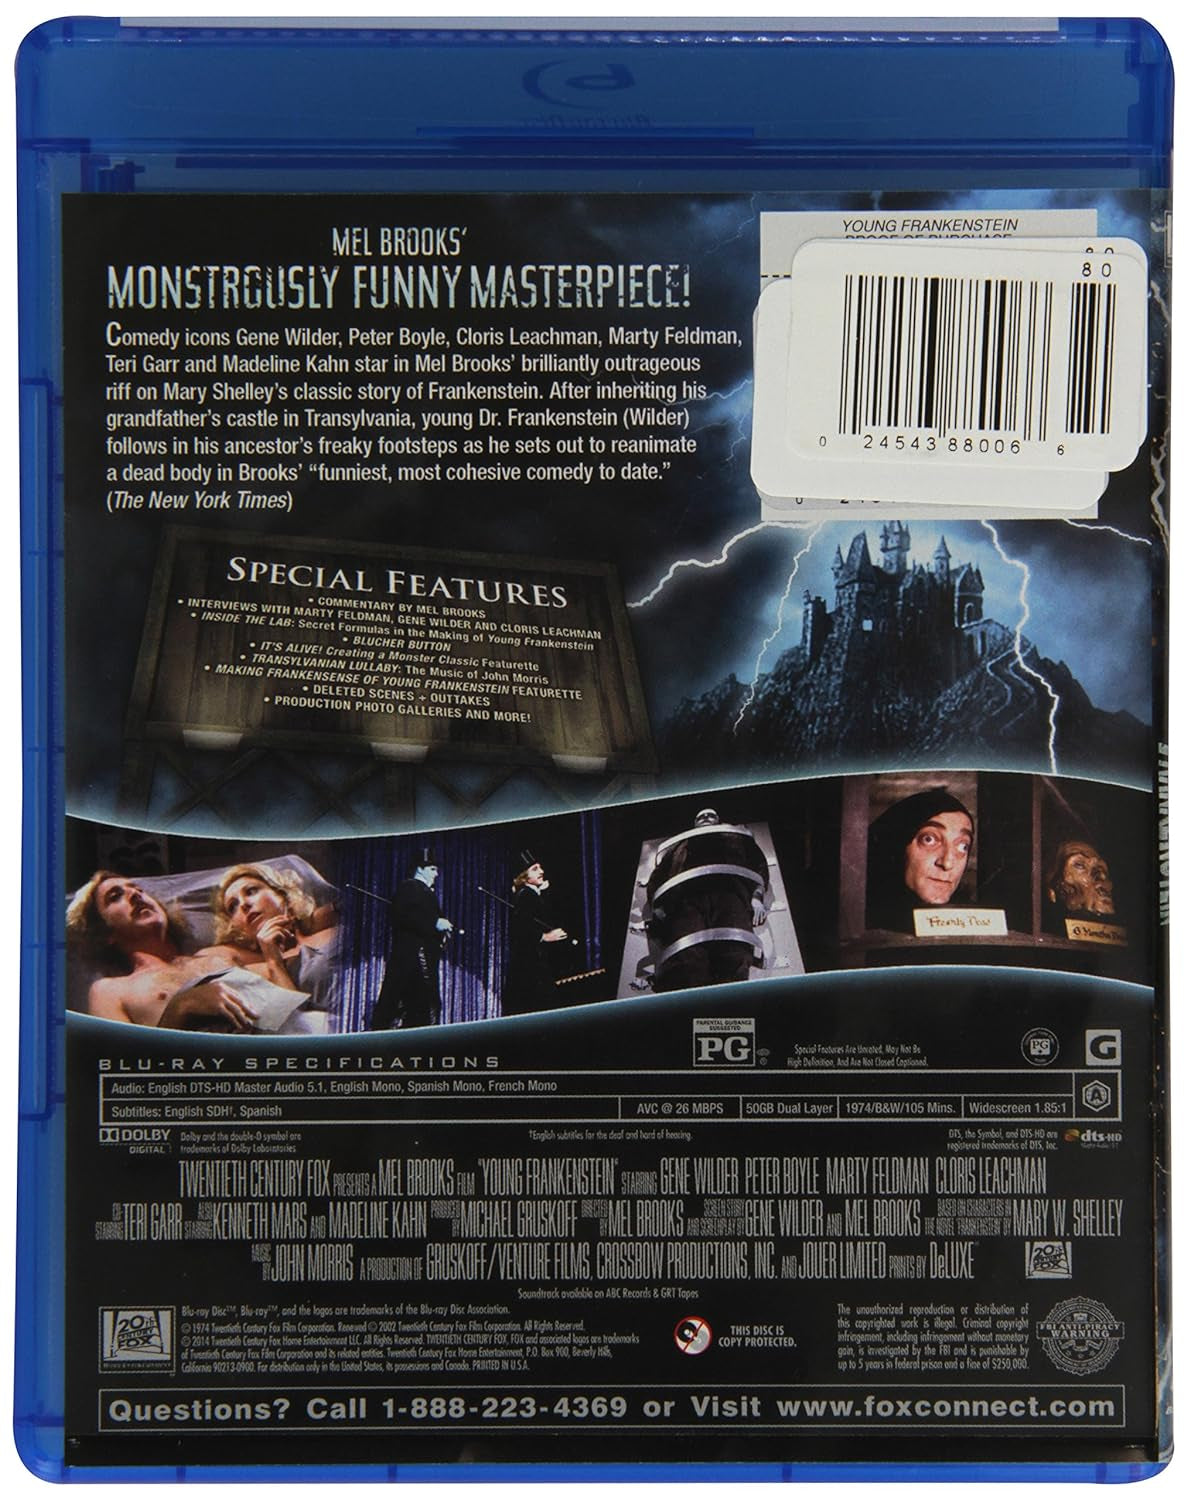 YOUNG FRANKENSTEIN [Blu-Ray]